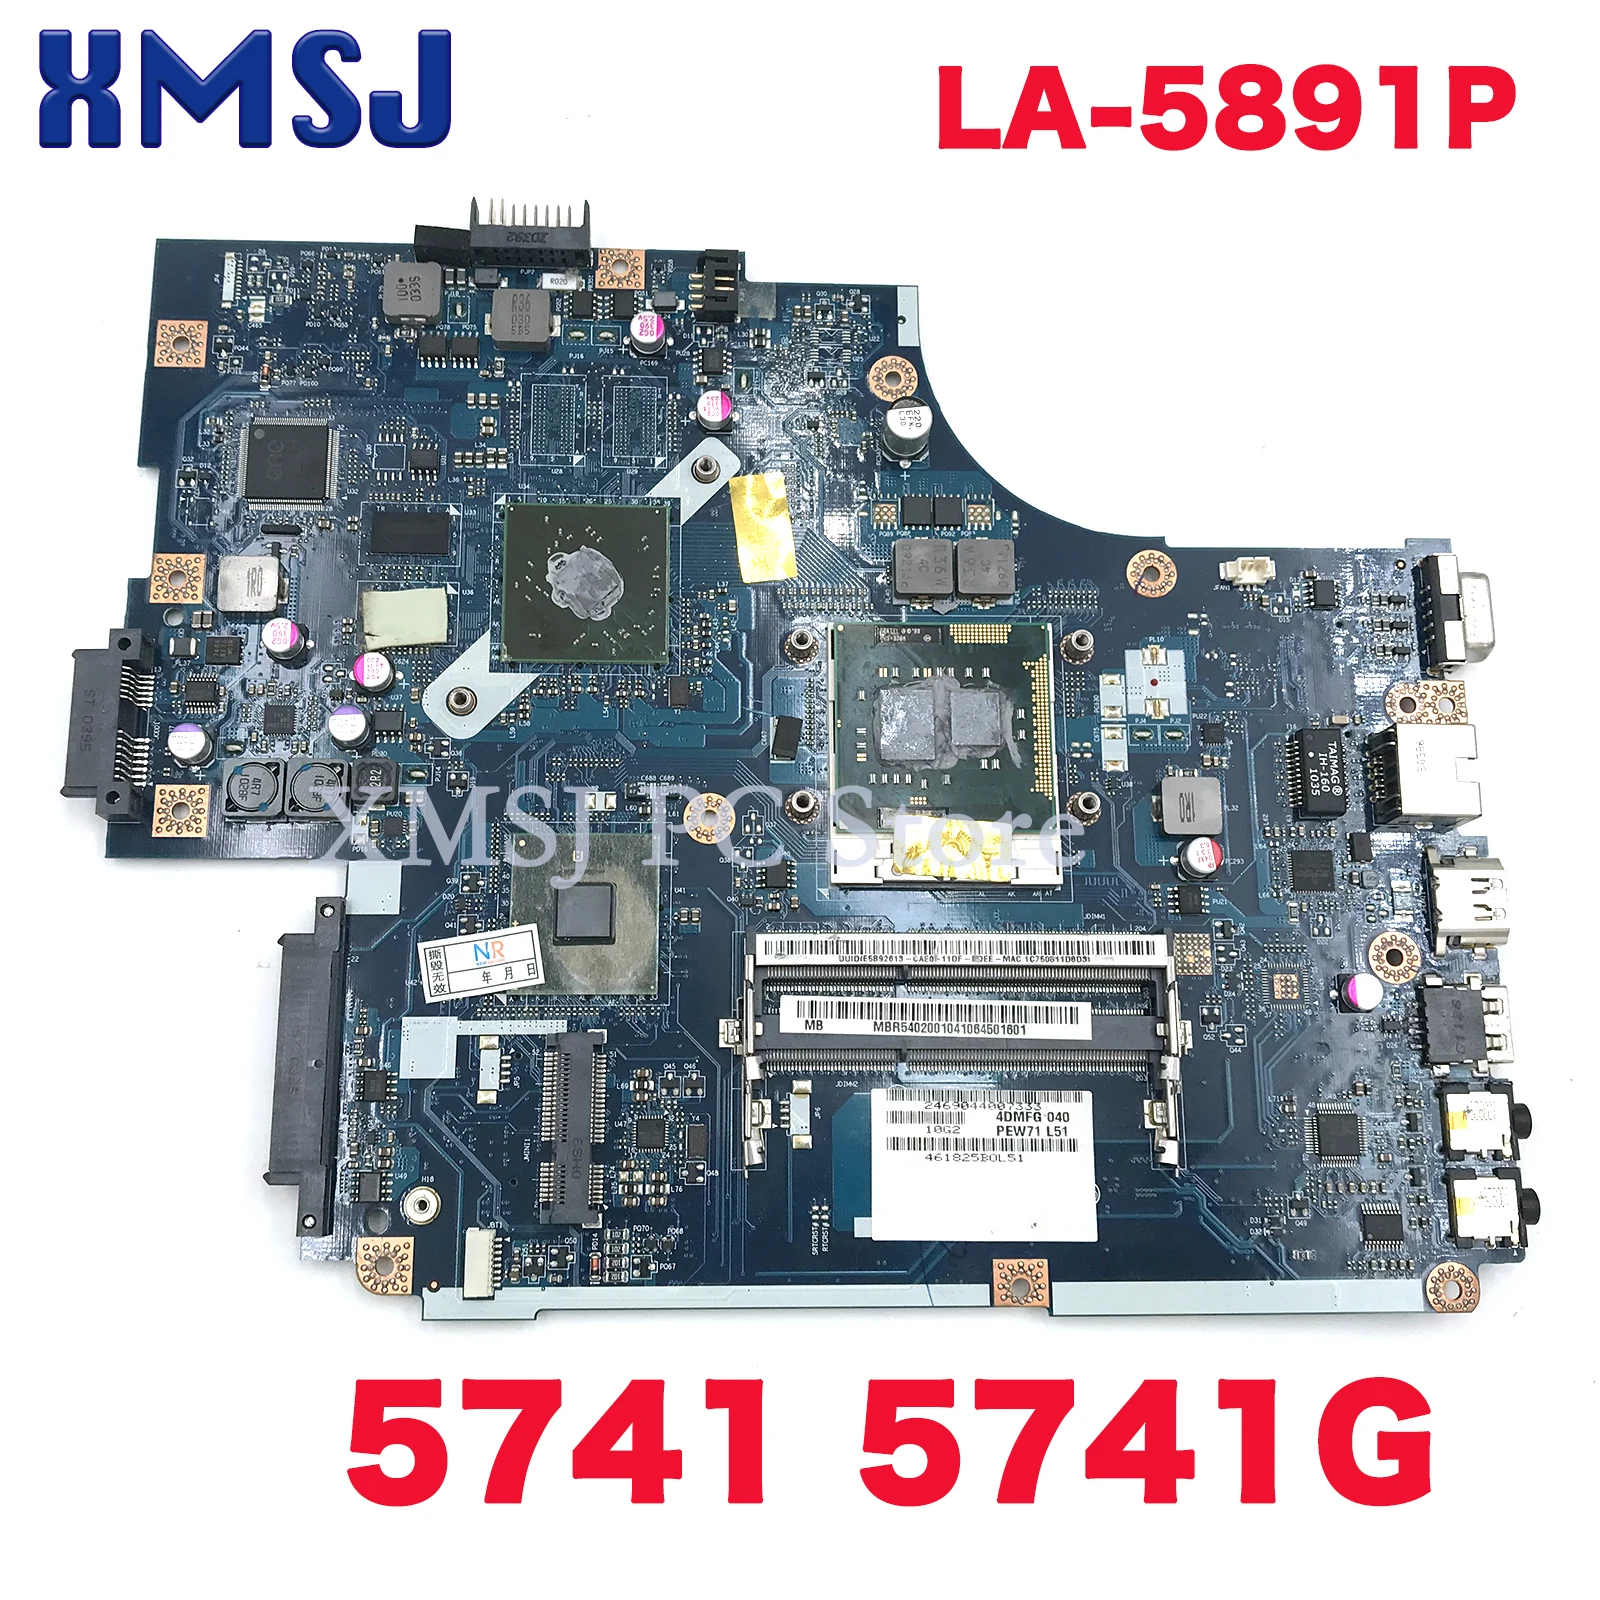 

XMSJ For ACER 5741 5741G MBPTD02001 NEW71 LA-5893P Laptop Motherboard HM55 GT320M 1GB DDR3 Free CPU Main Board Full Test